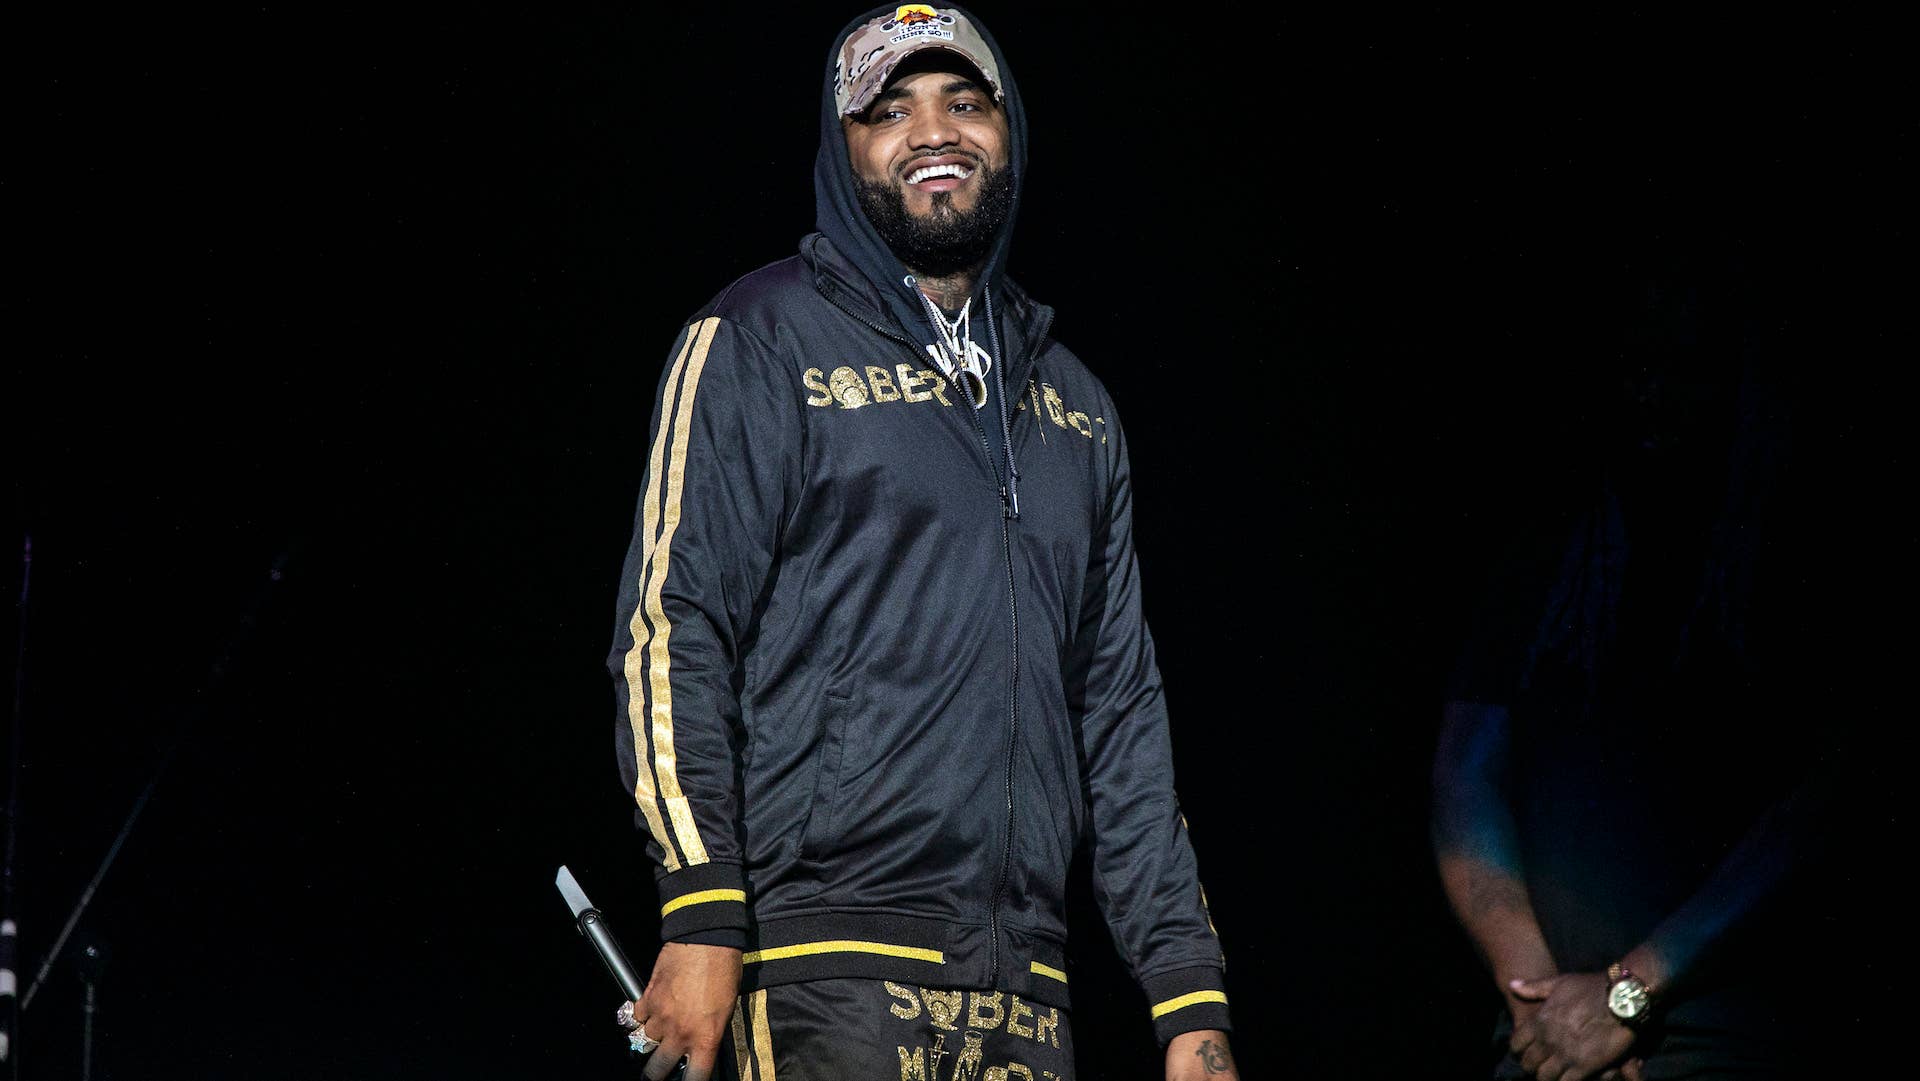 This is an image of Joyner Lucas